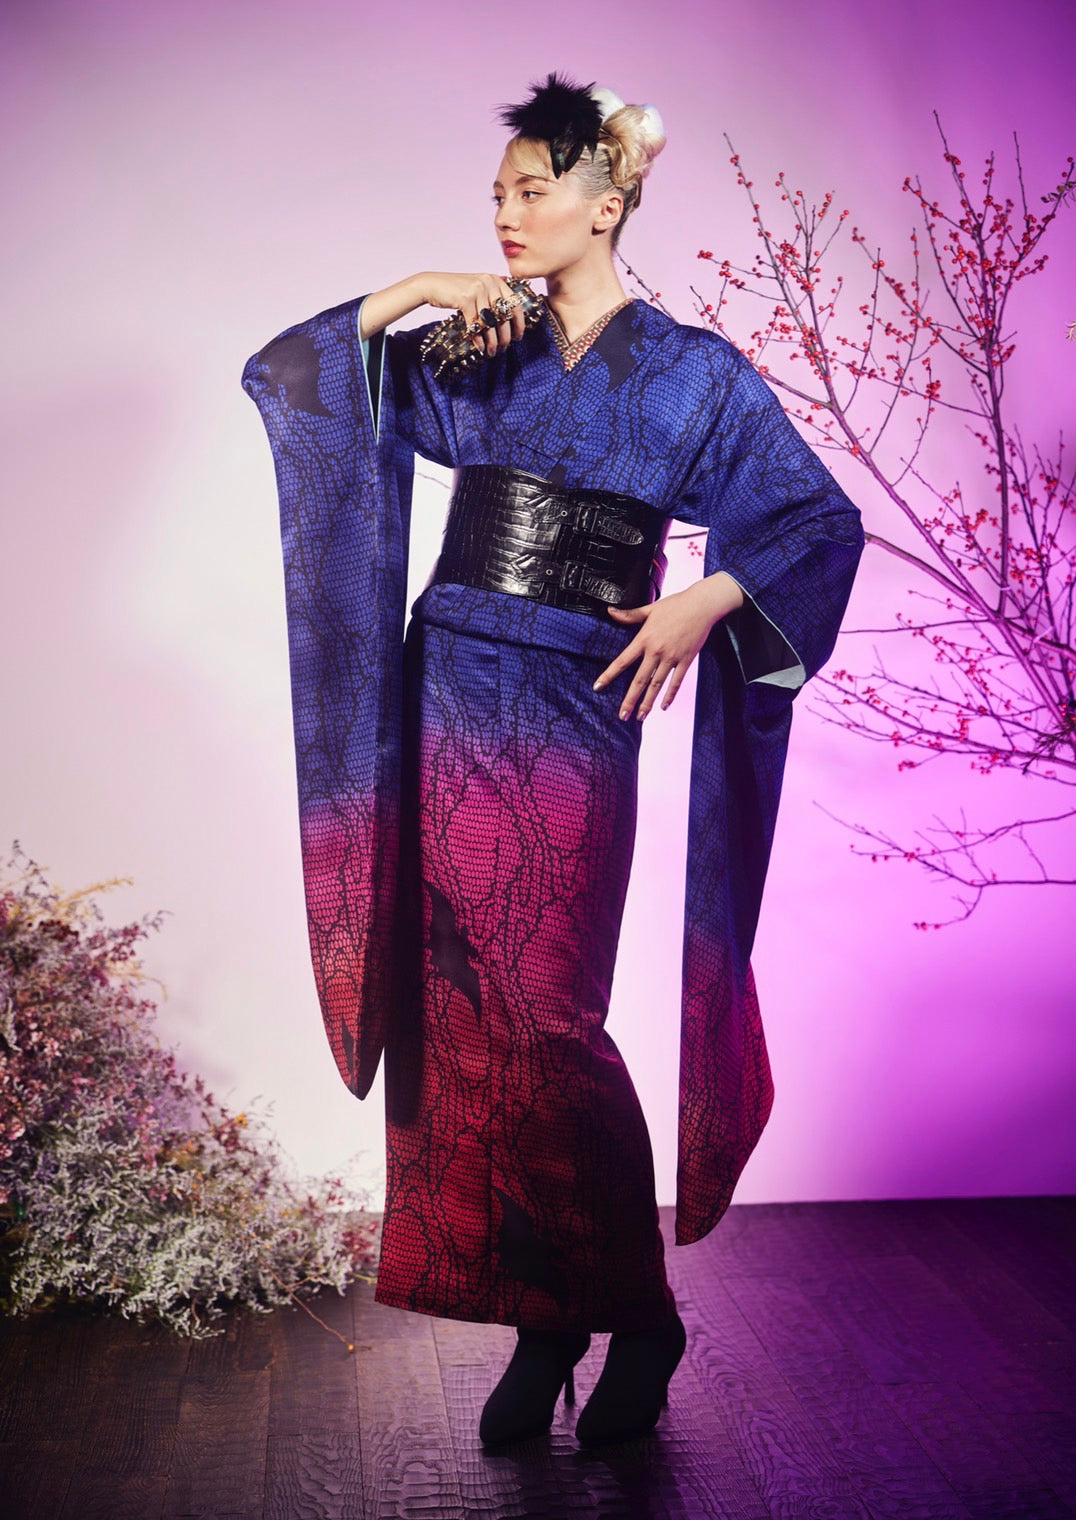 [New catalog request]<br> 2023 Furisode New Collection